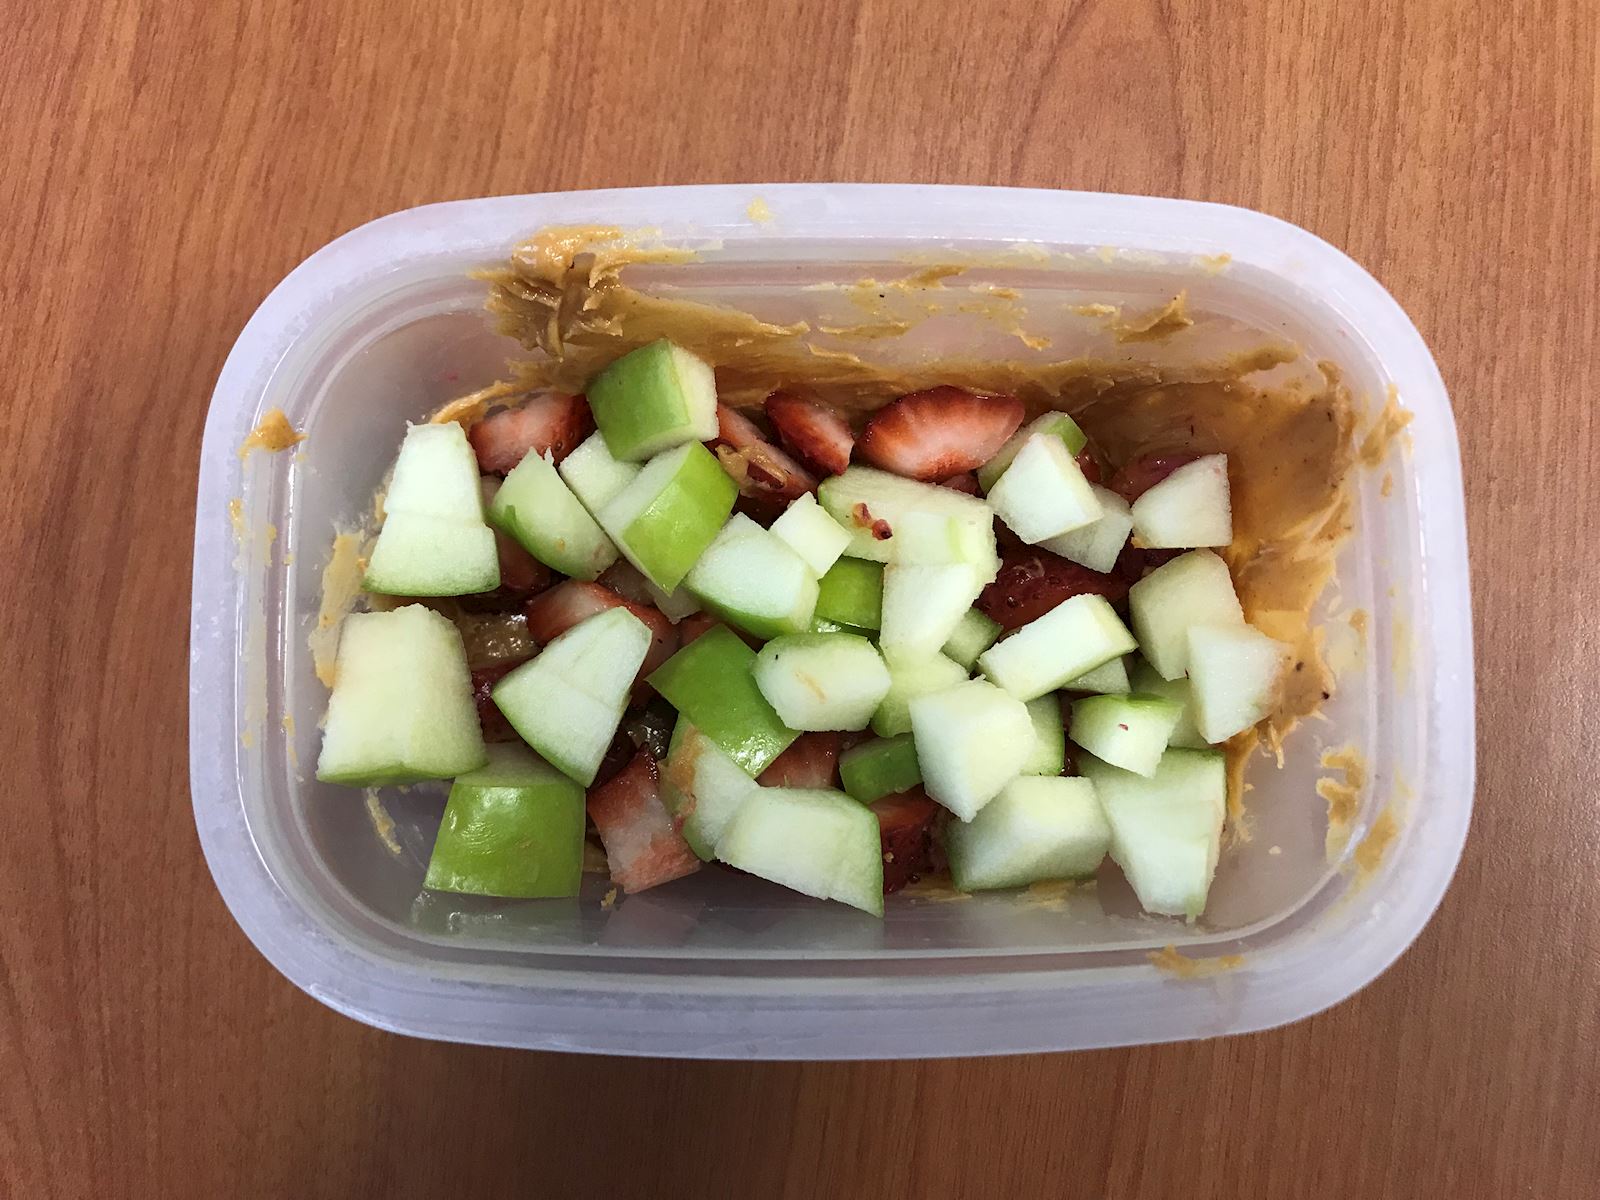 apples and strawberries on peanut butter